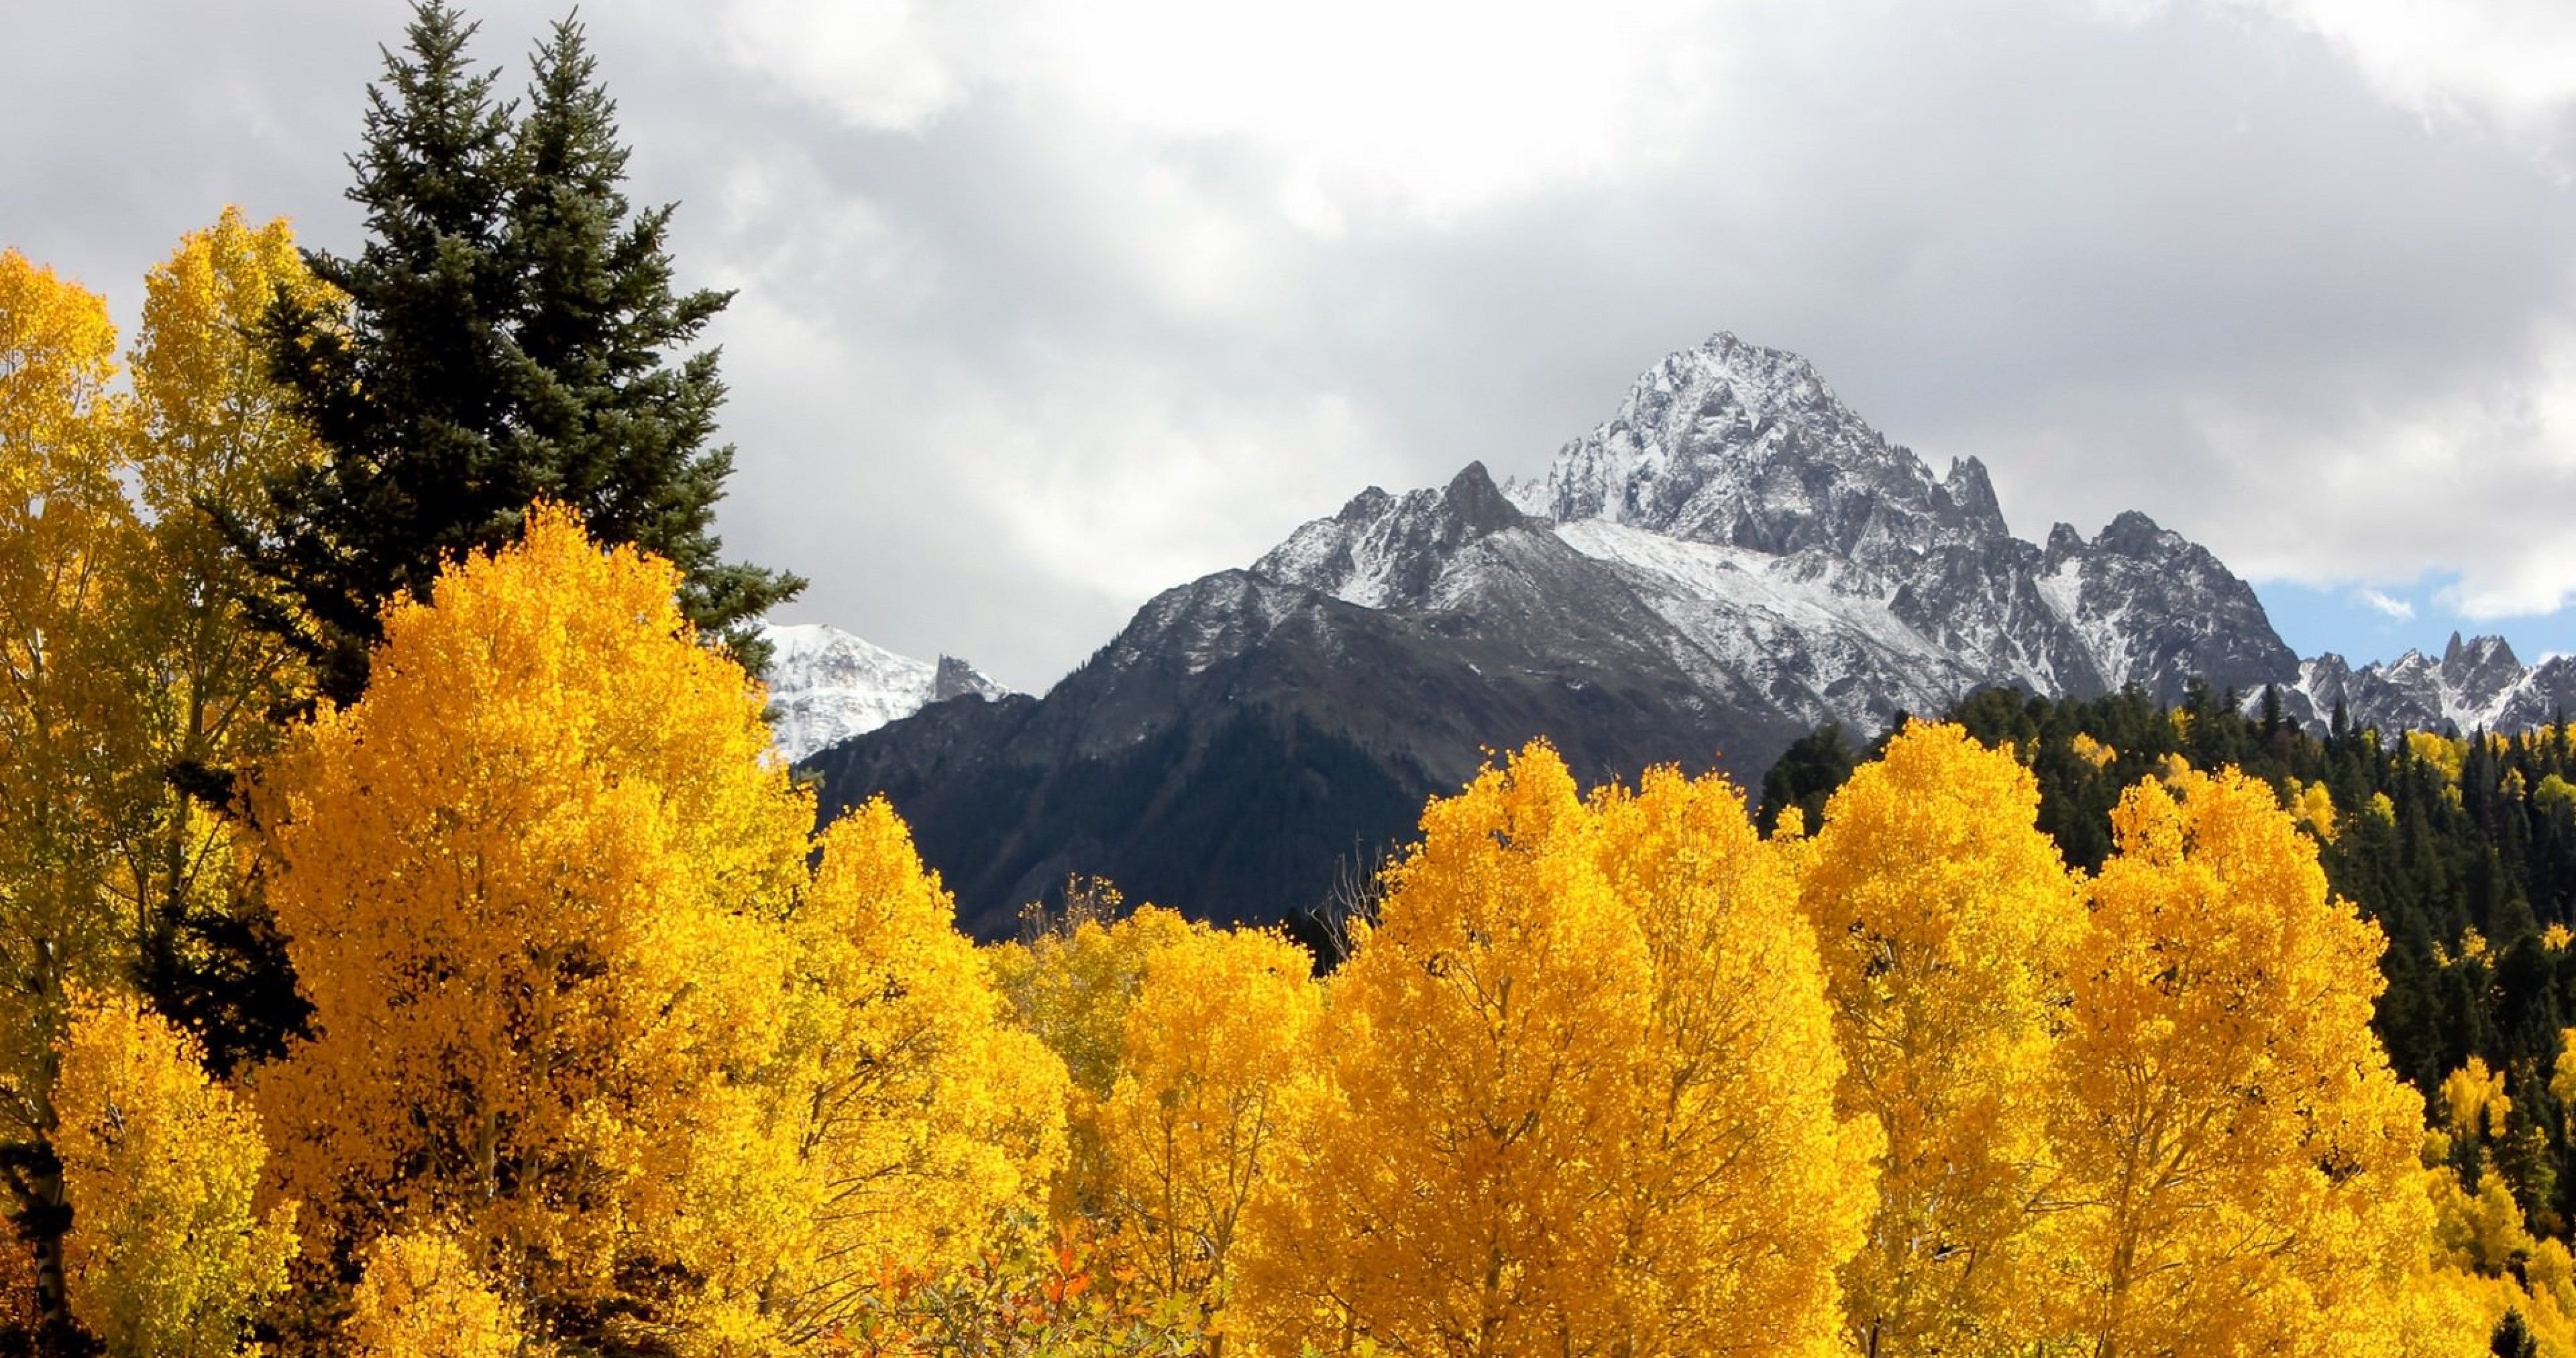 yellow trees in mountains wallpaper 4k ultra HD wallpaper High quality walls